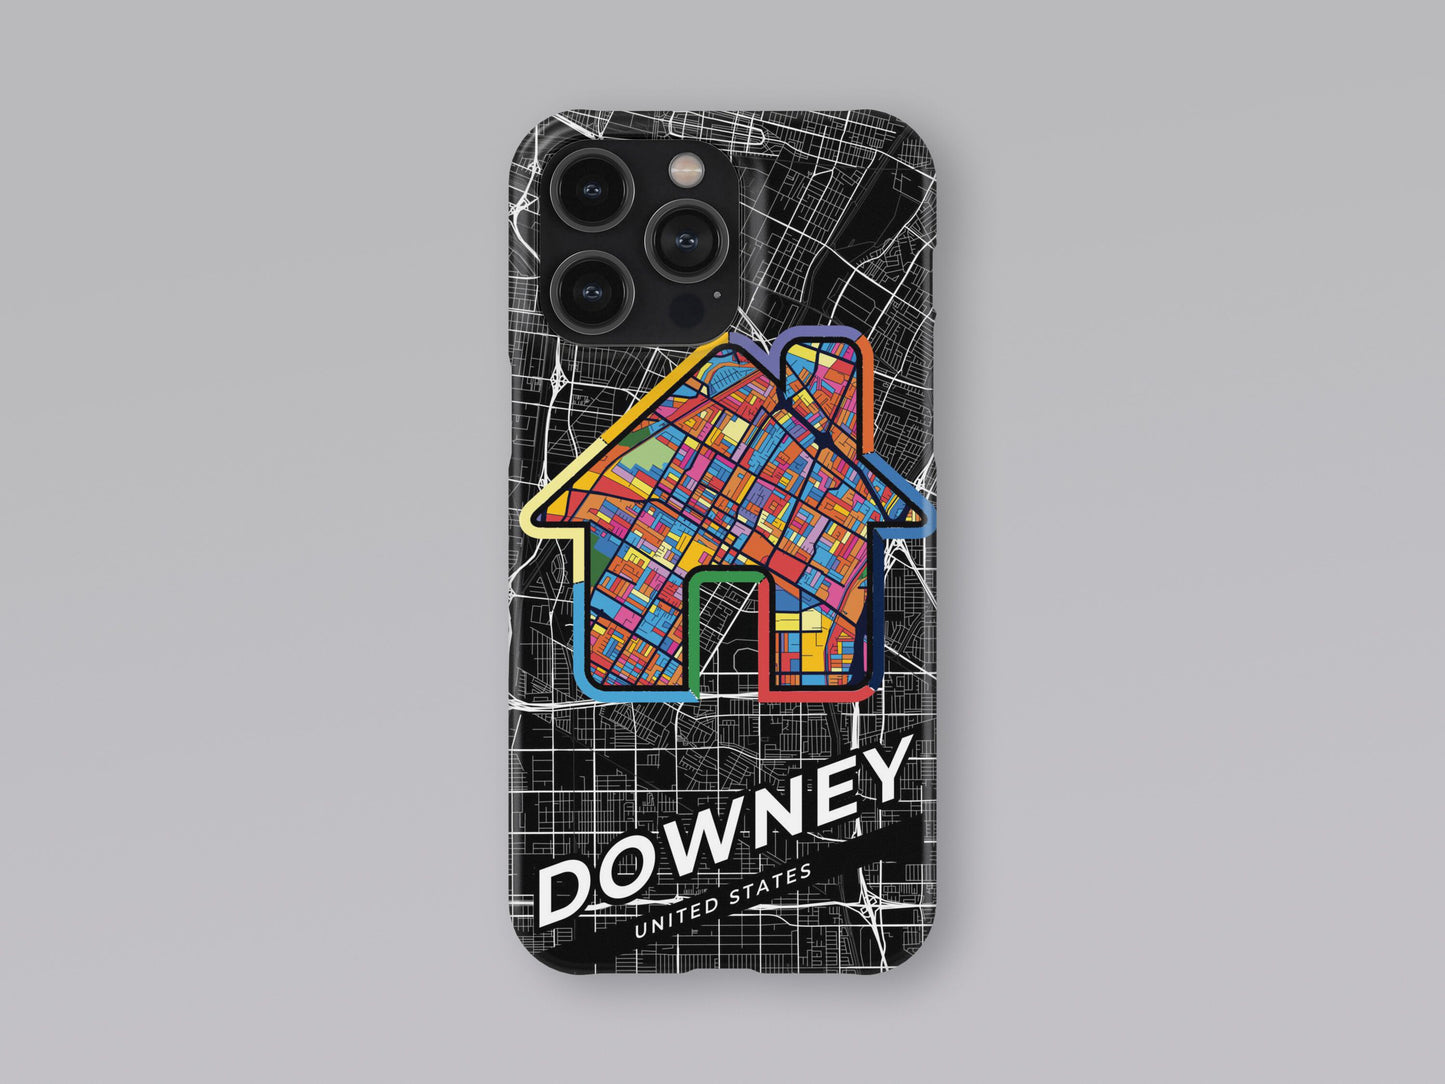 Downey California slim phone case with colorful icon. Birthday, wedding or housewarming gift. Couple match cases. 3